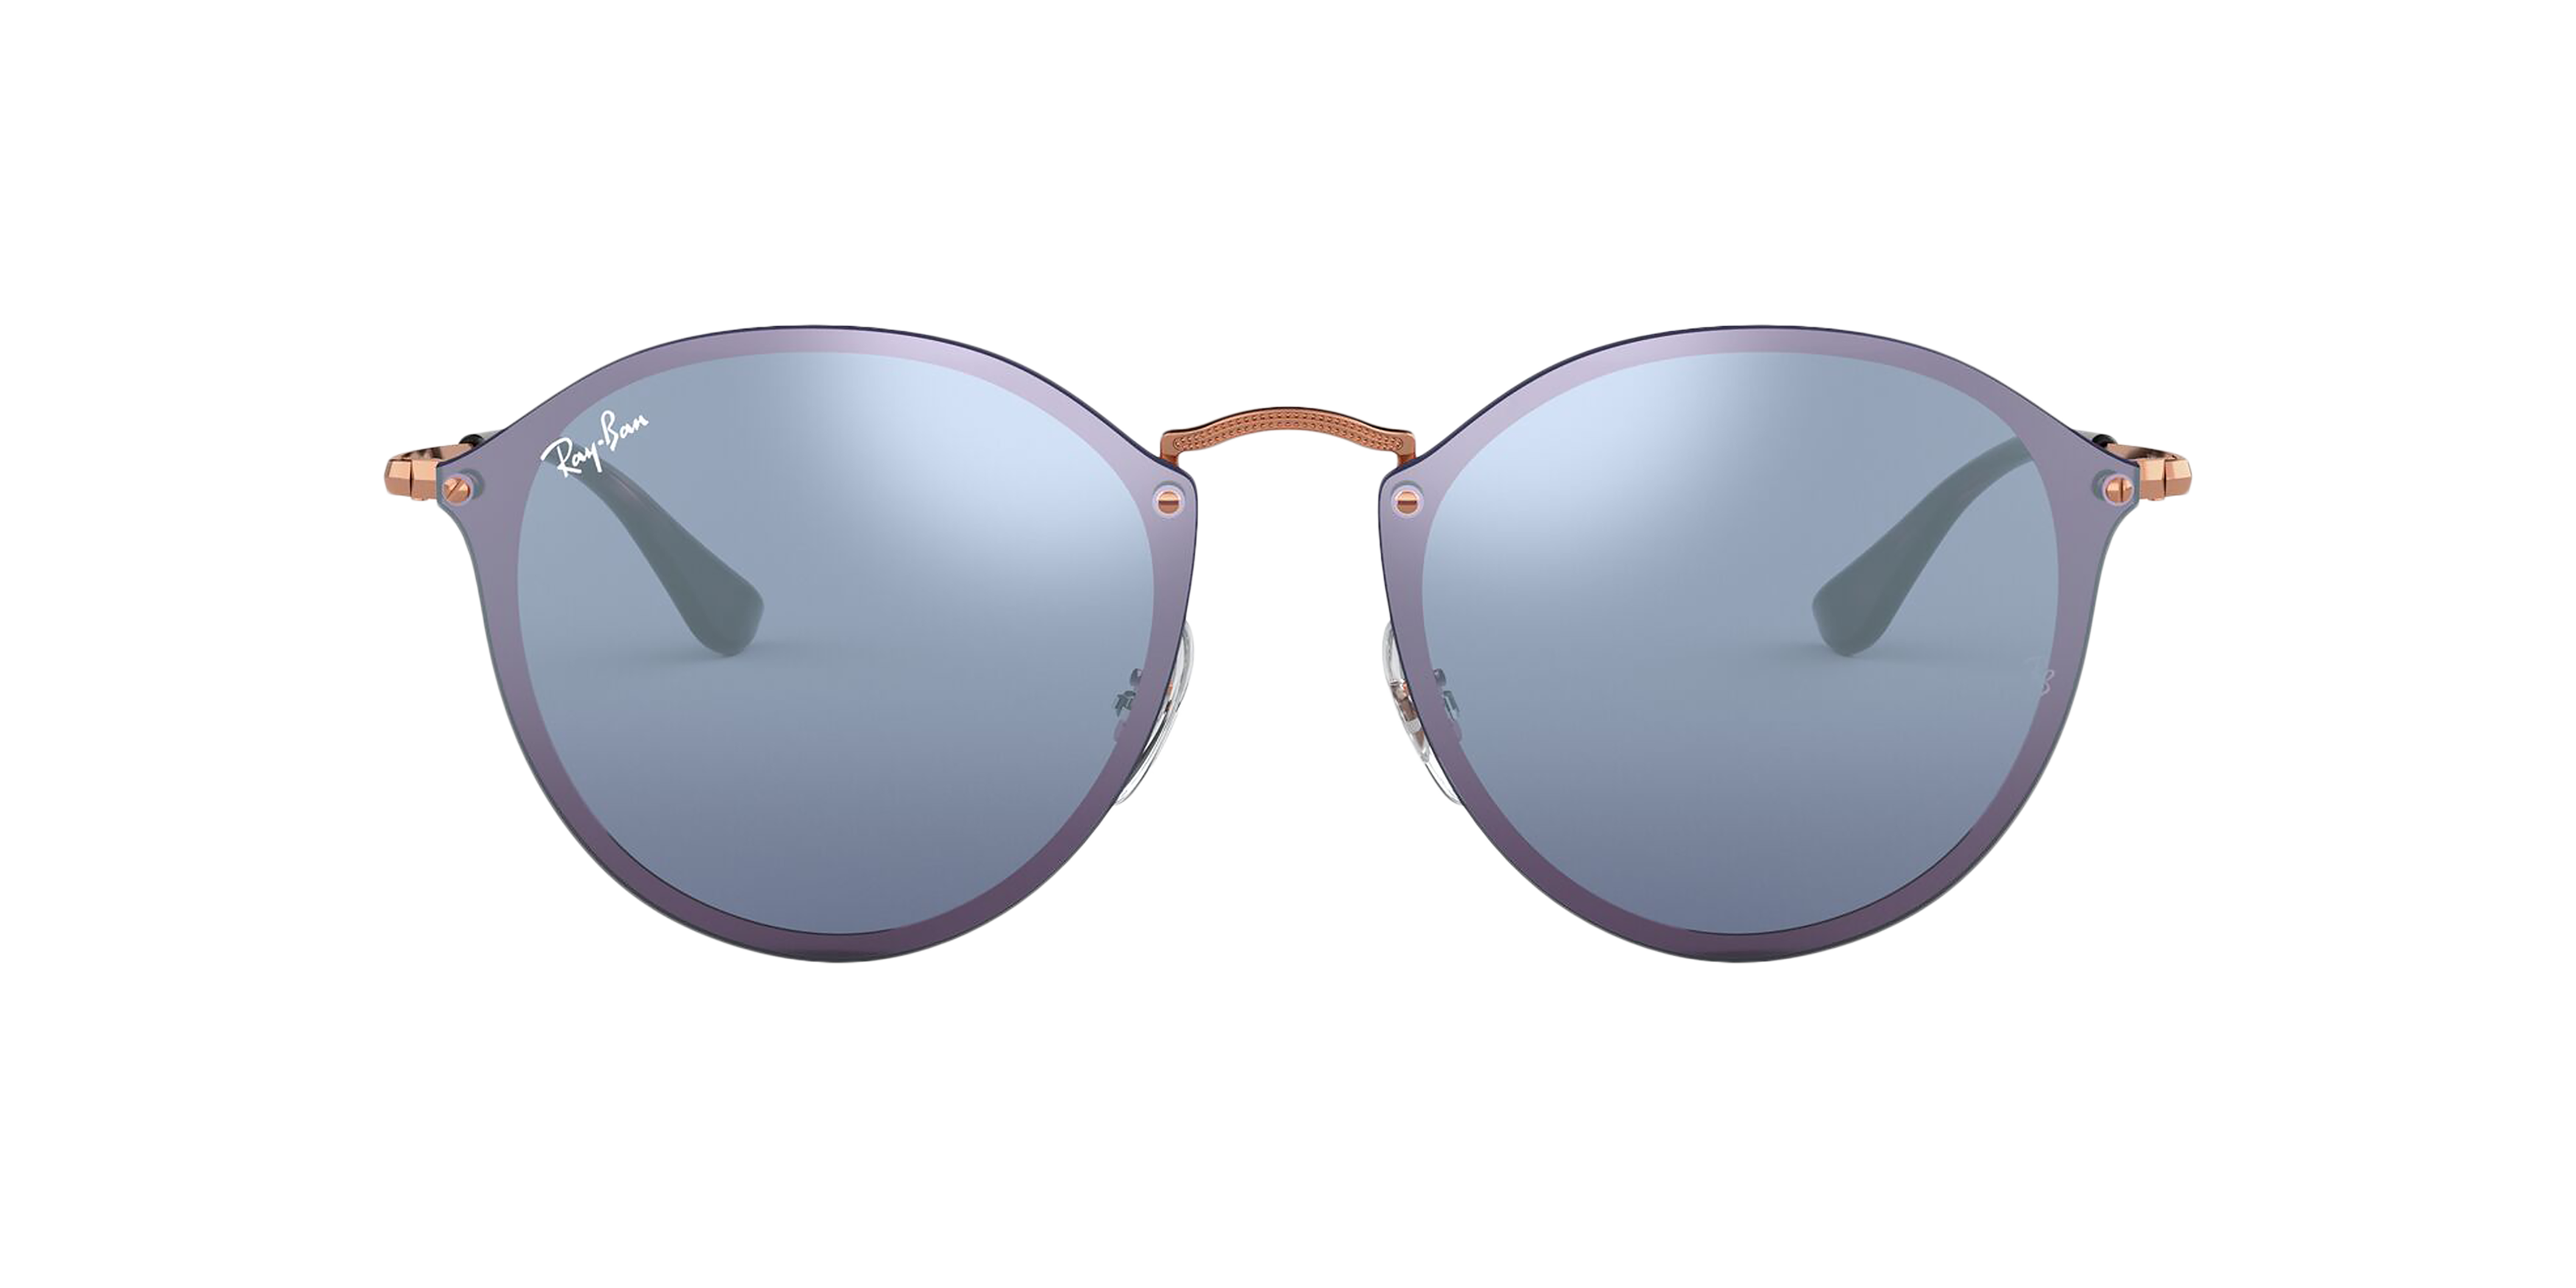 [products.image.front] Ray-Ban Blaze Round RB3574N 90351U